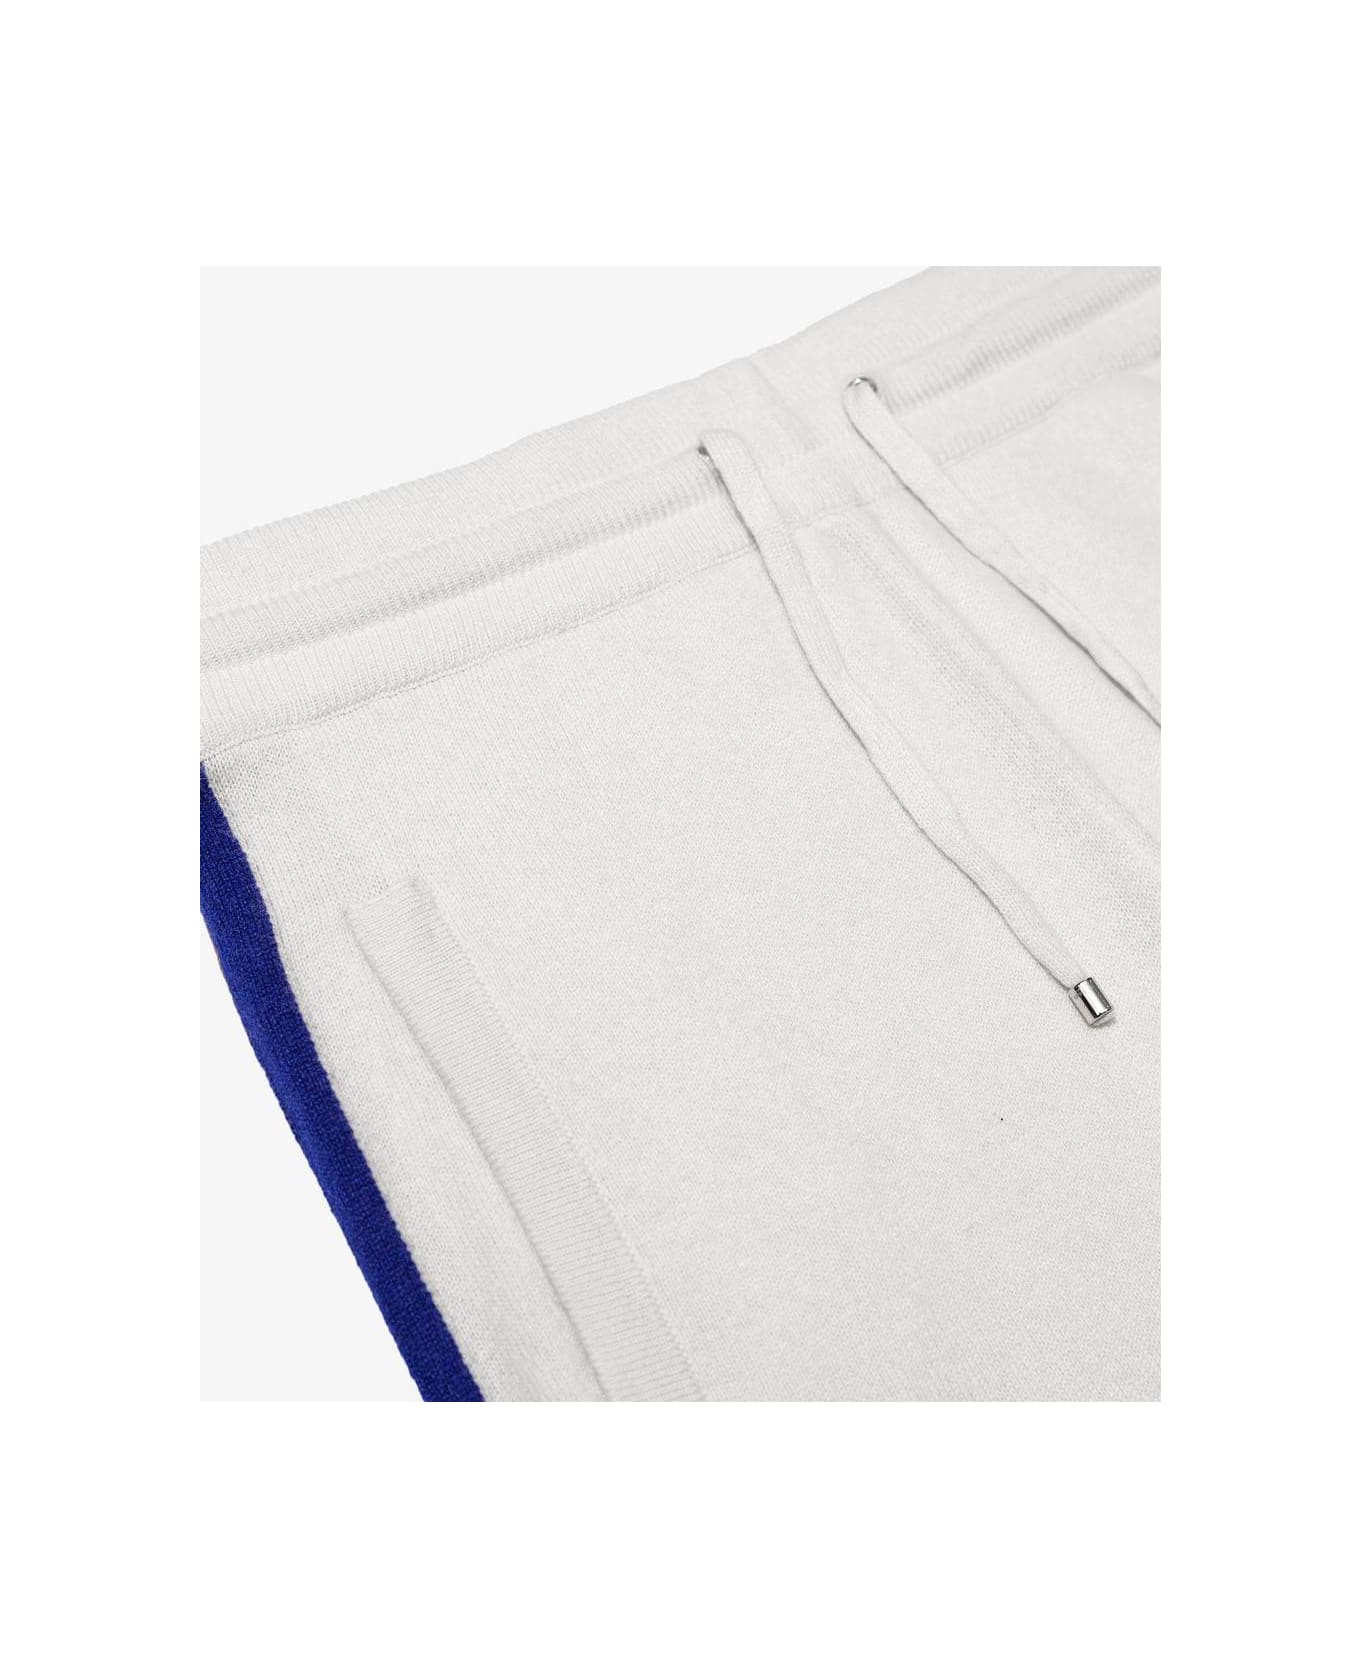 Larusmiani Trousers Ski Collection Pants - Ivory ボトムス